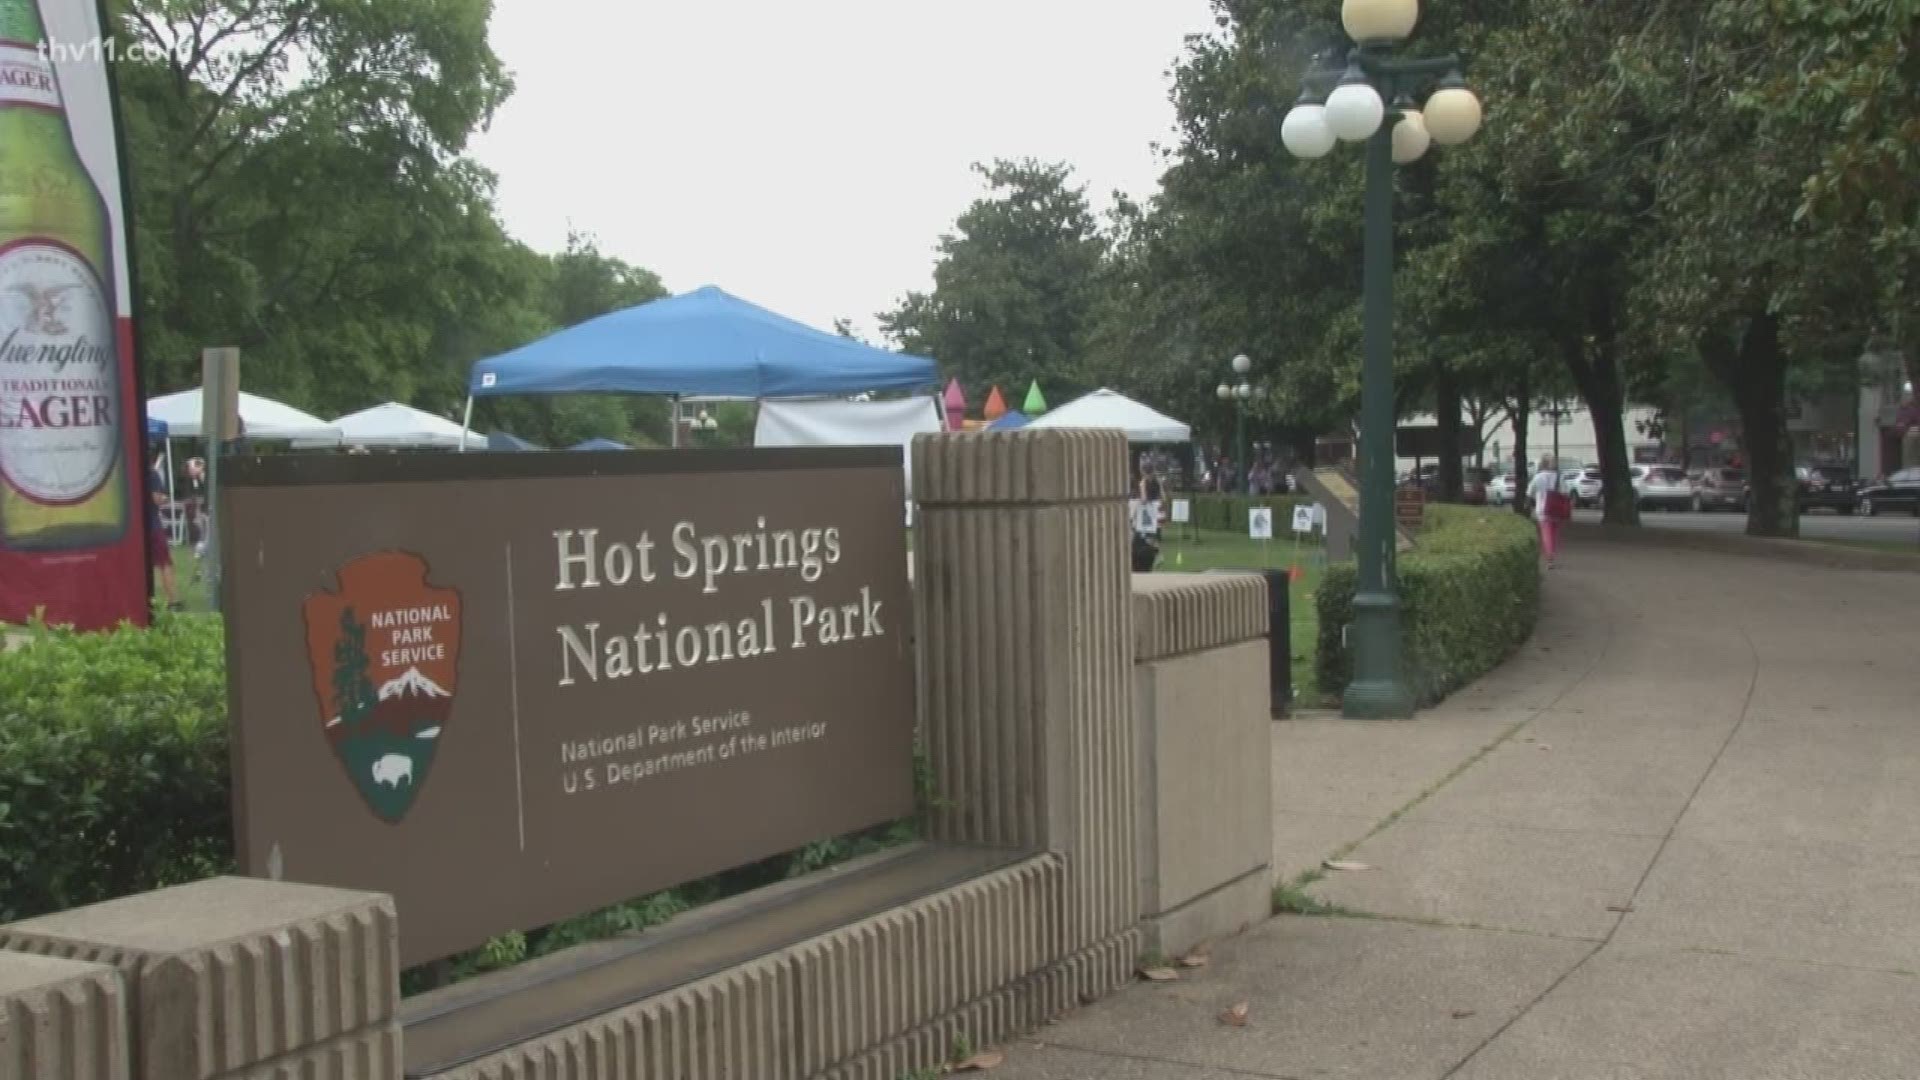 This year, Hot Springs puts their holiday focus on the national park.